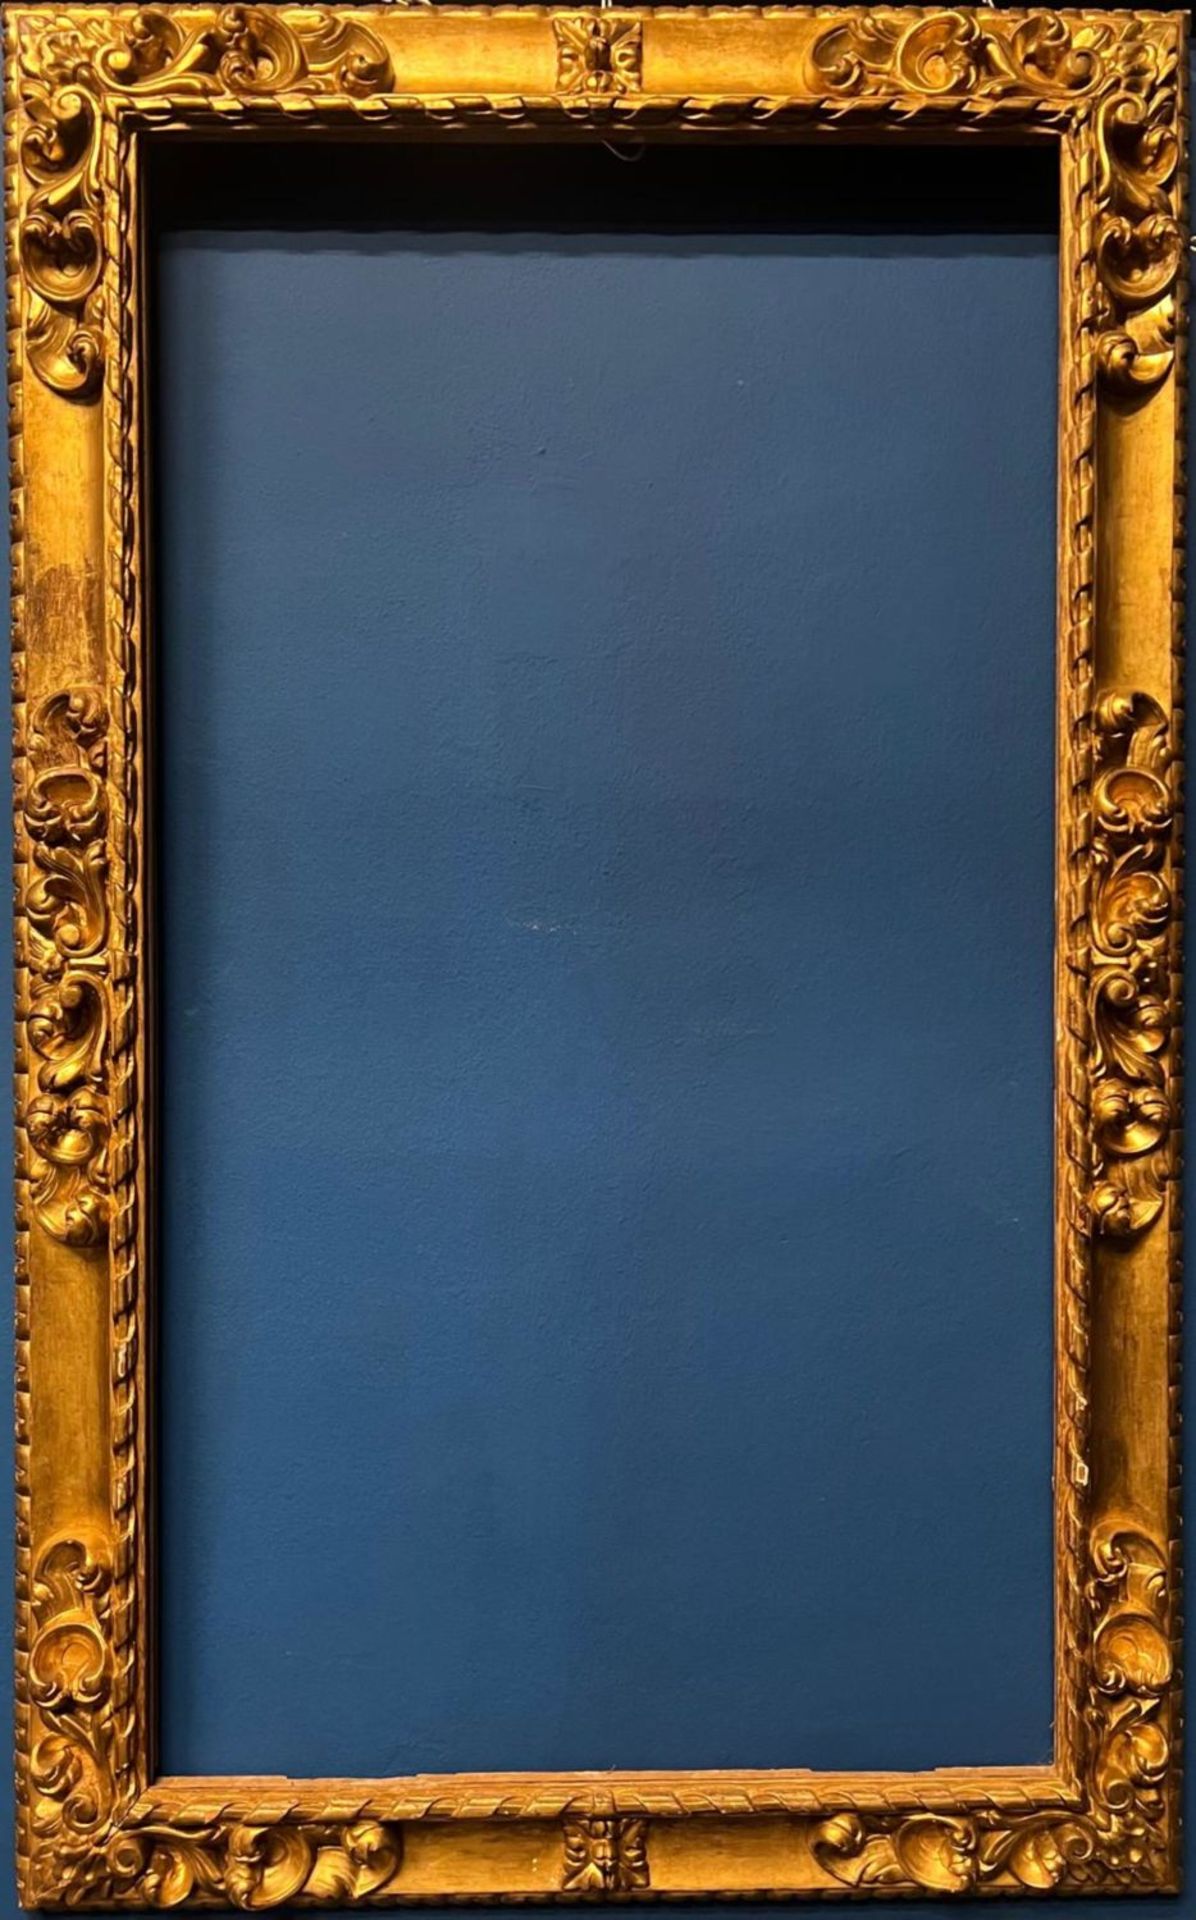 Important and large Spanish Baroque frame from the mid-18th century, in carved wood and gilded with 